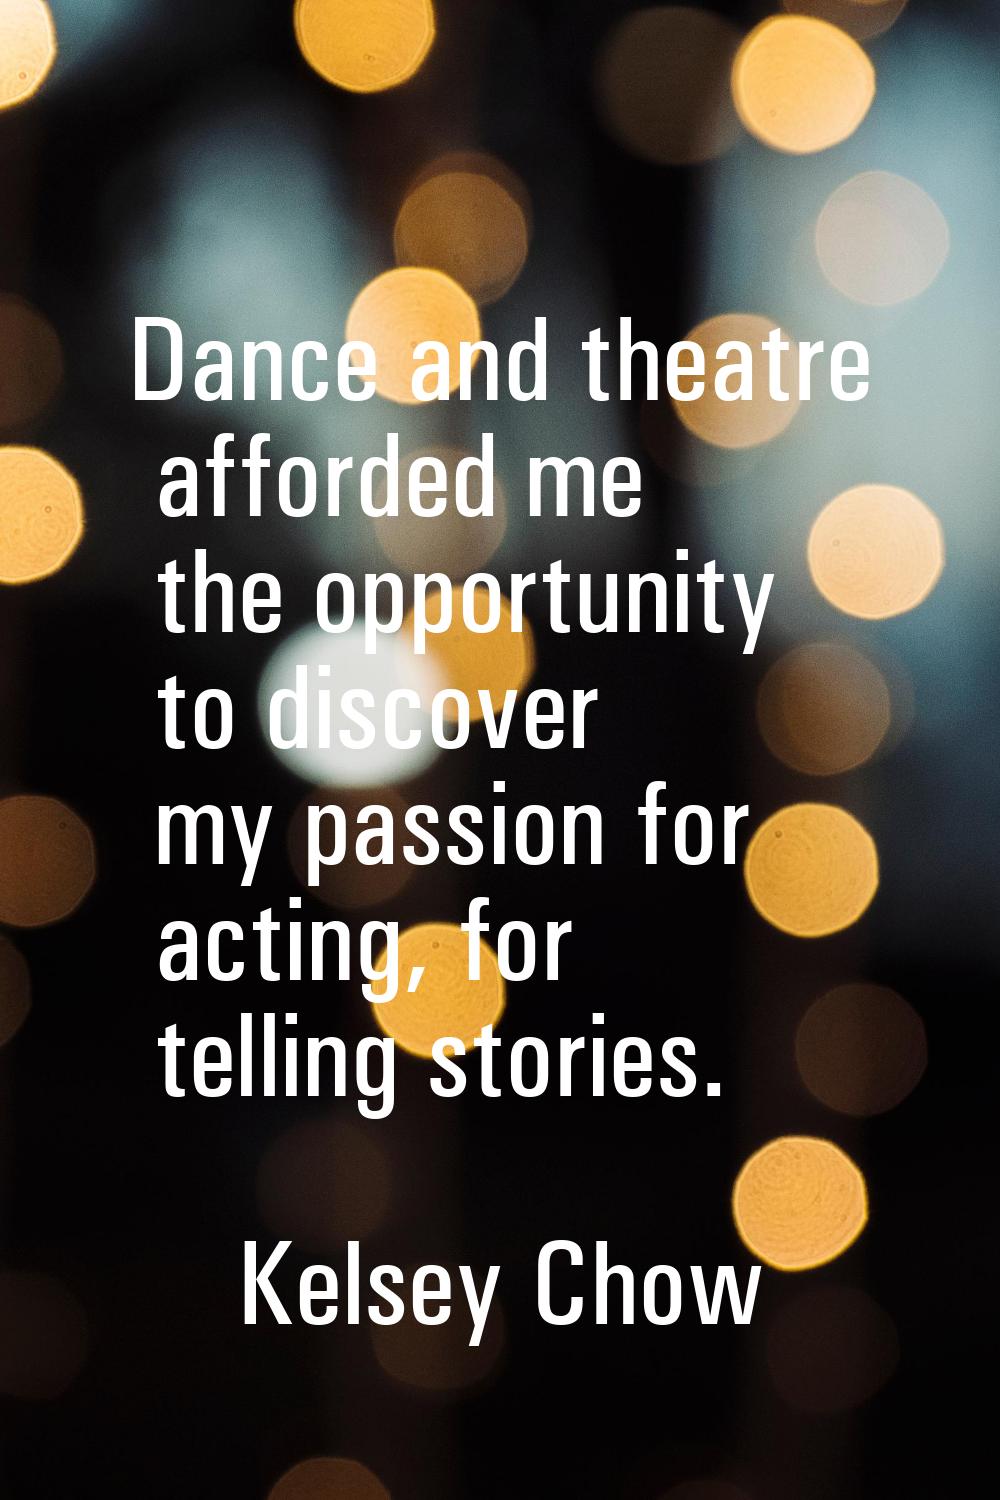 Dance and theatre afforded me the opportunity to discover my passion for acting, for telling storie